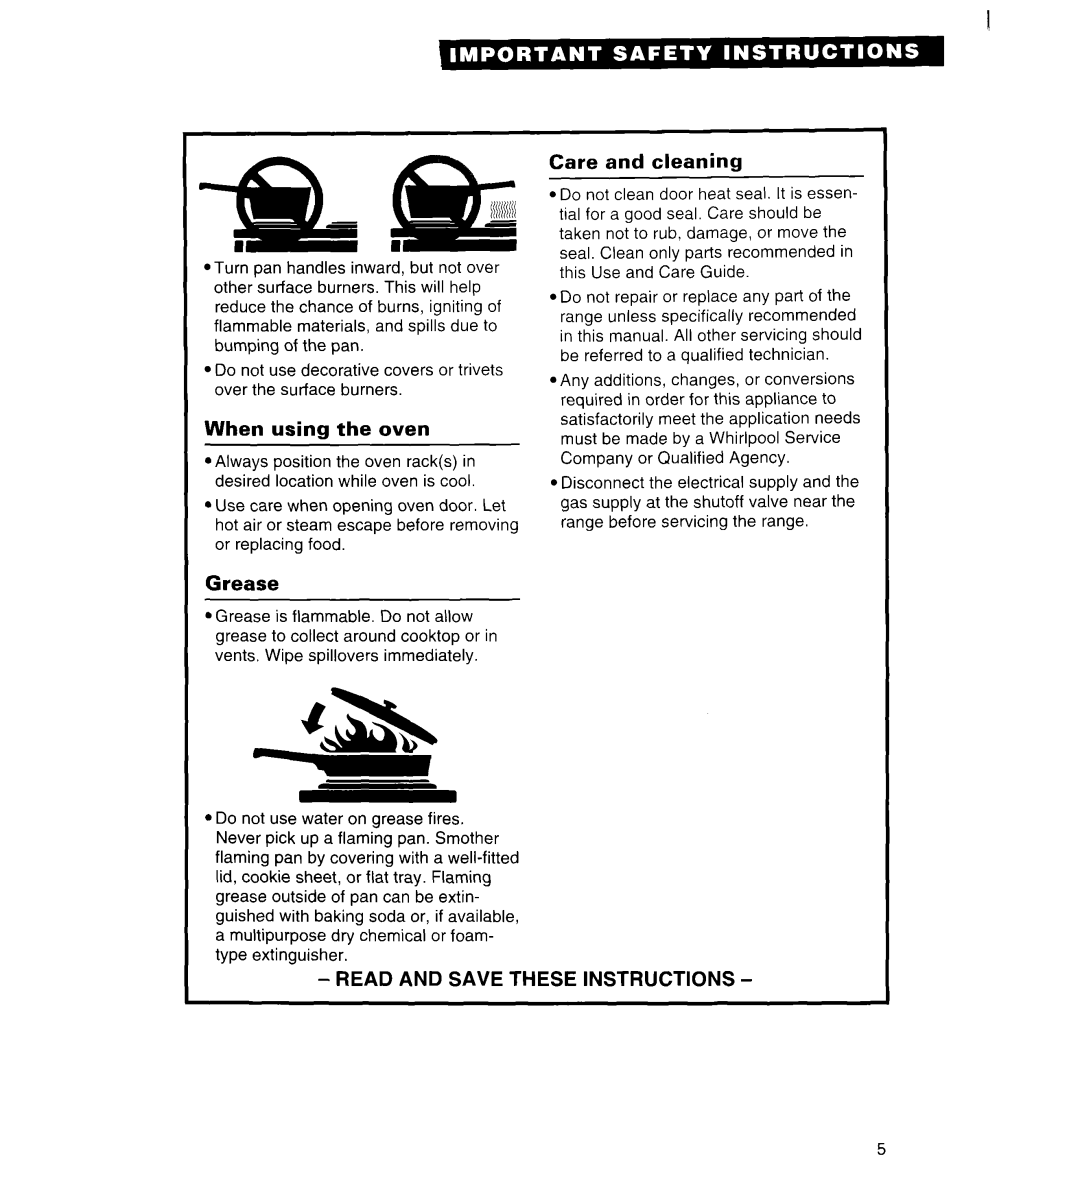 Estate TGRGIWZB manual When using the oven, Grease, Care and cleaninn, Read And Save These Instructions 